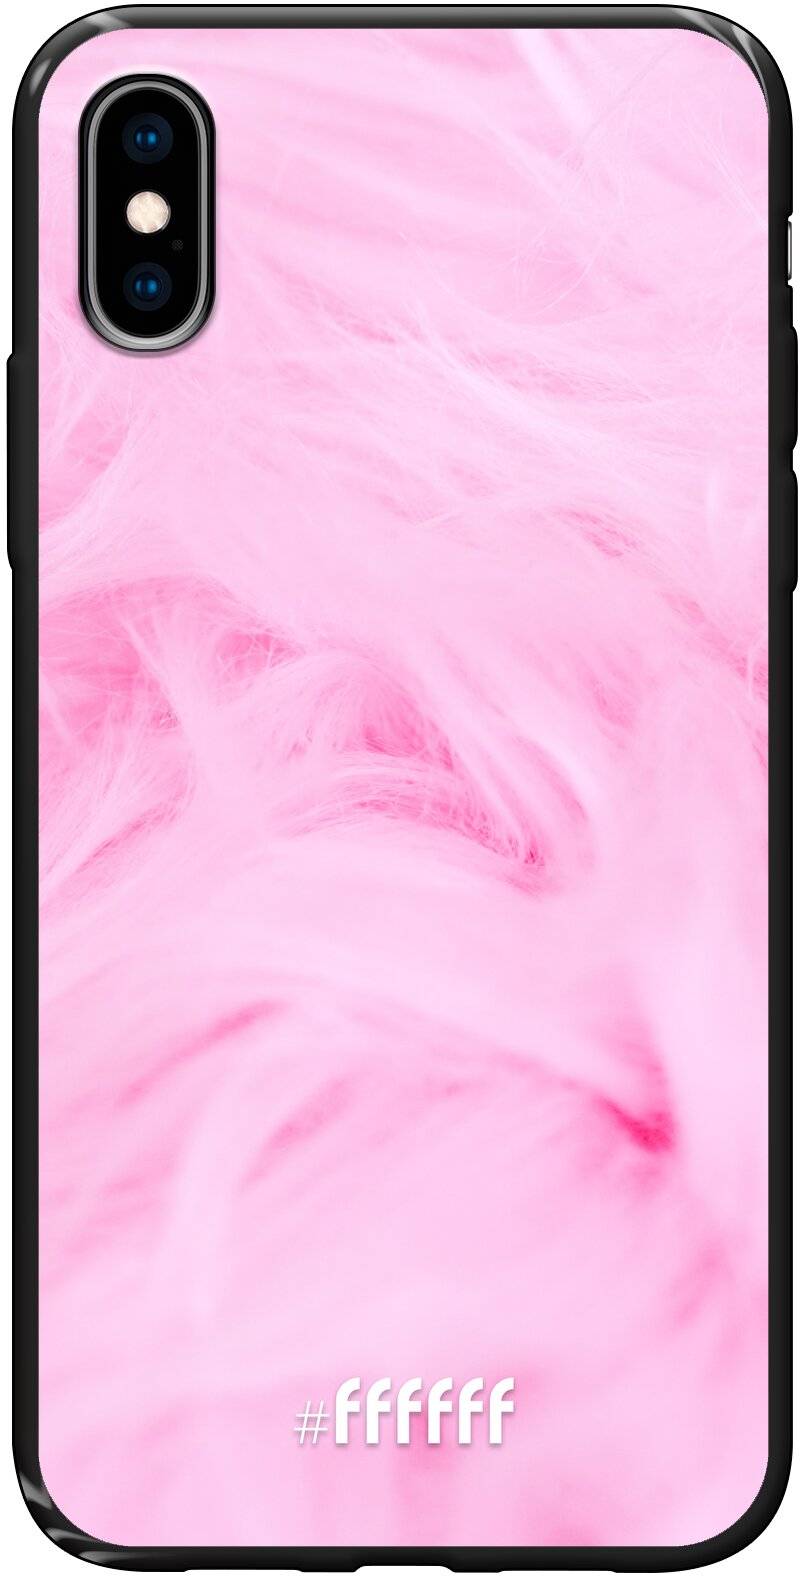 Cotton Candy iPhone X